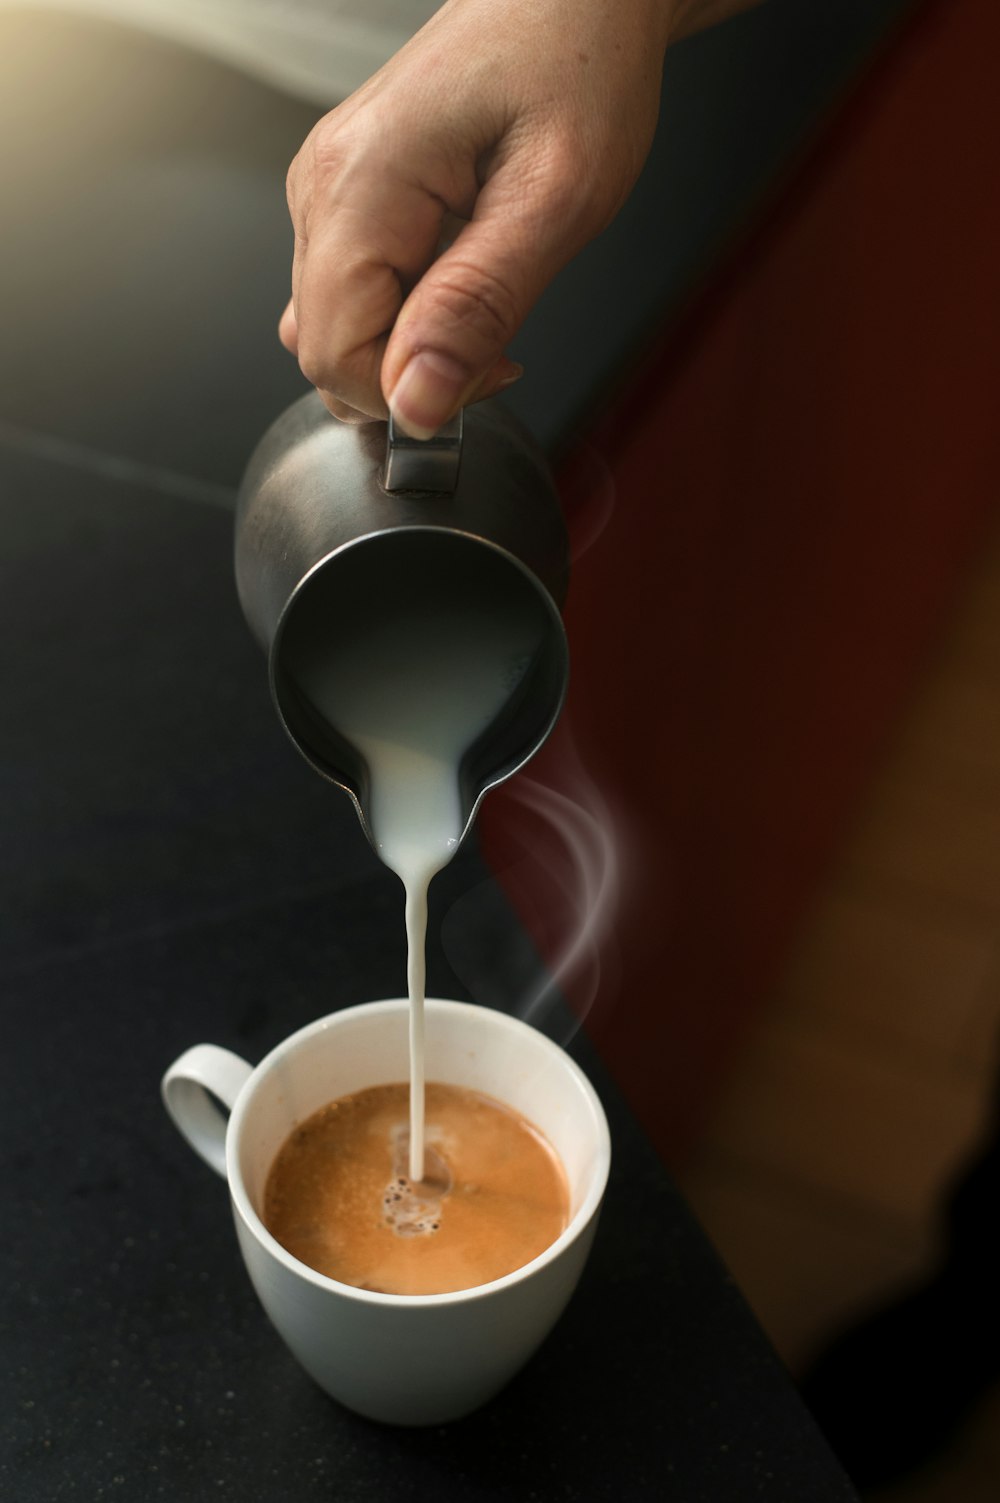 a person pours milk into a cup of coffee